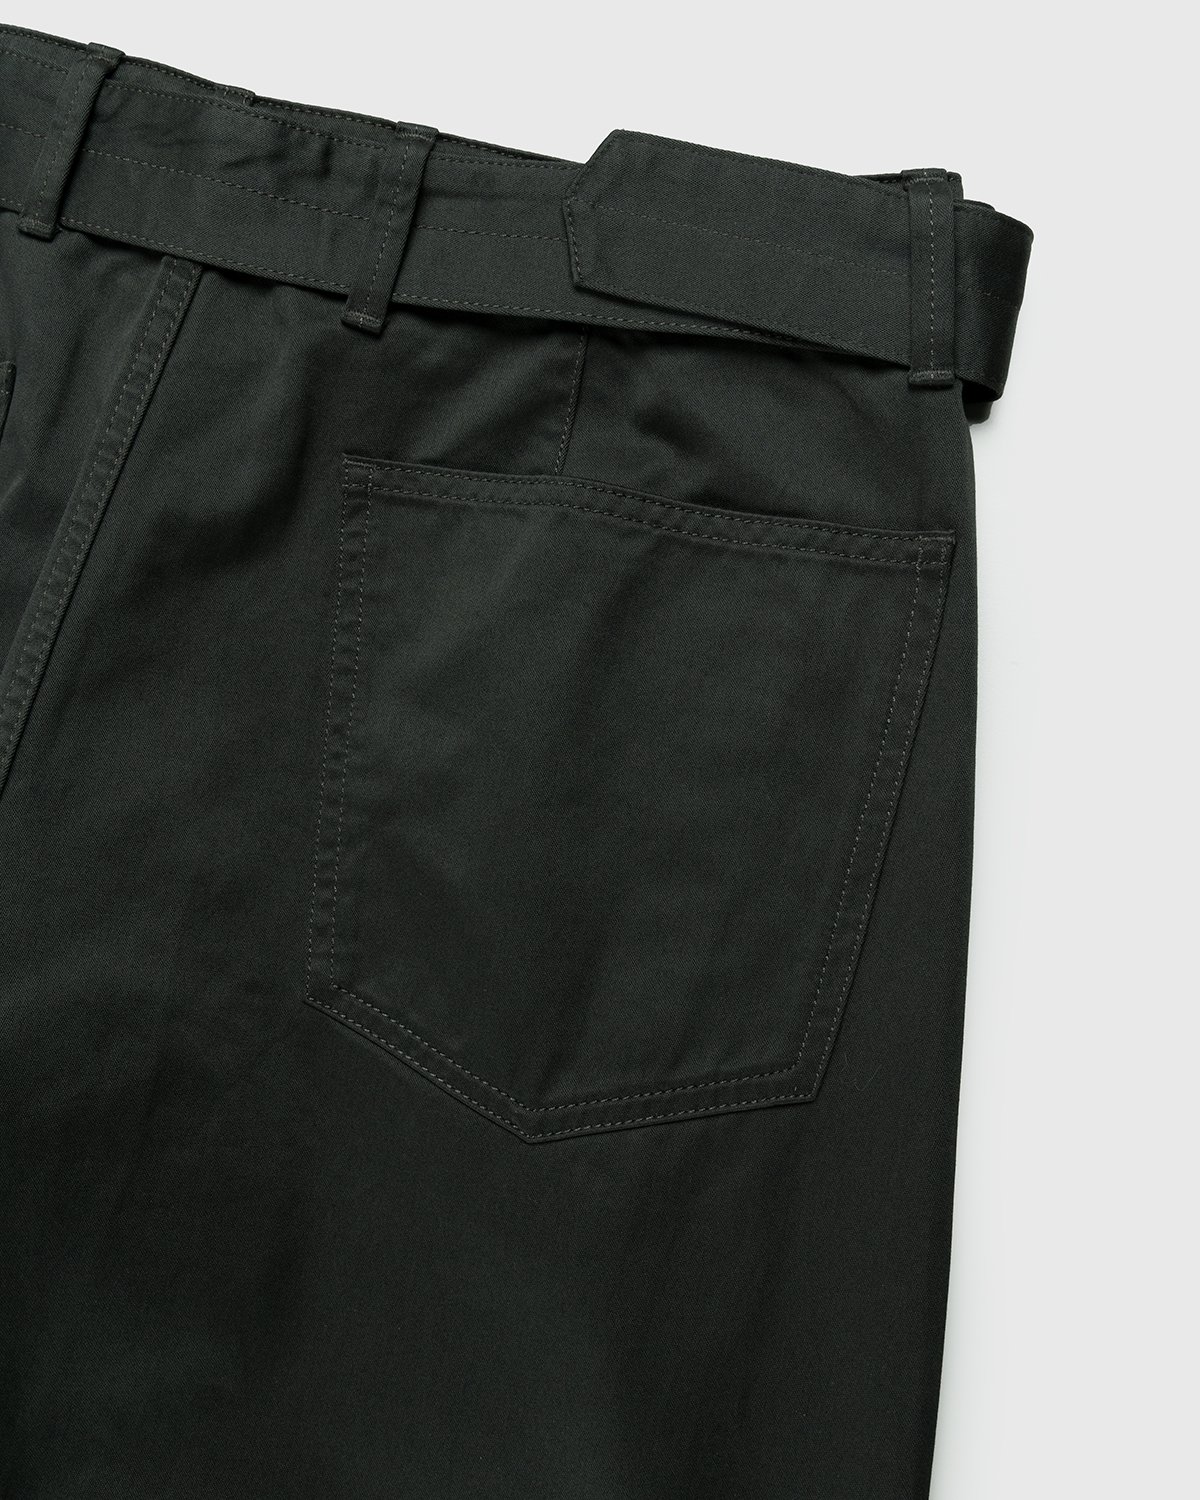 Lemaire - Twisted Belted Pants Dark Slate Green - Clothing - Grey - Image 3